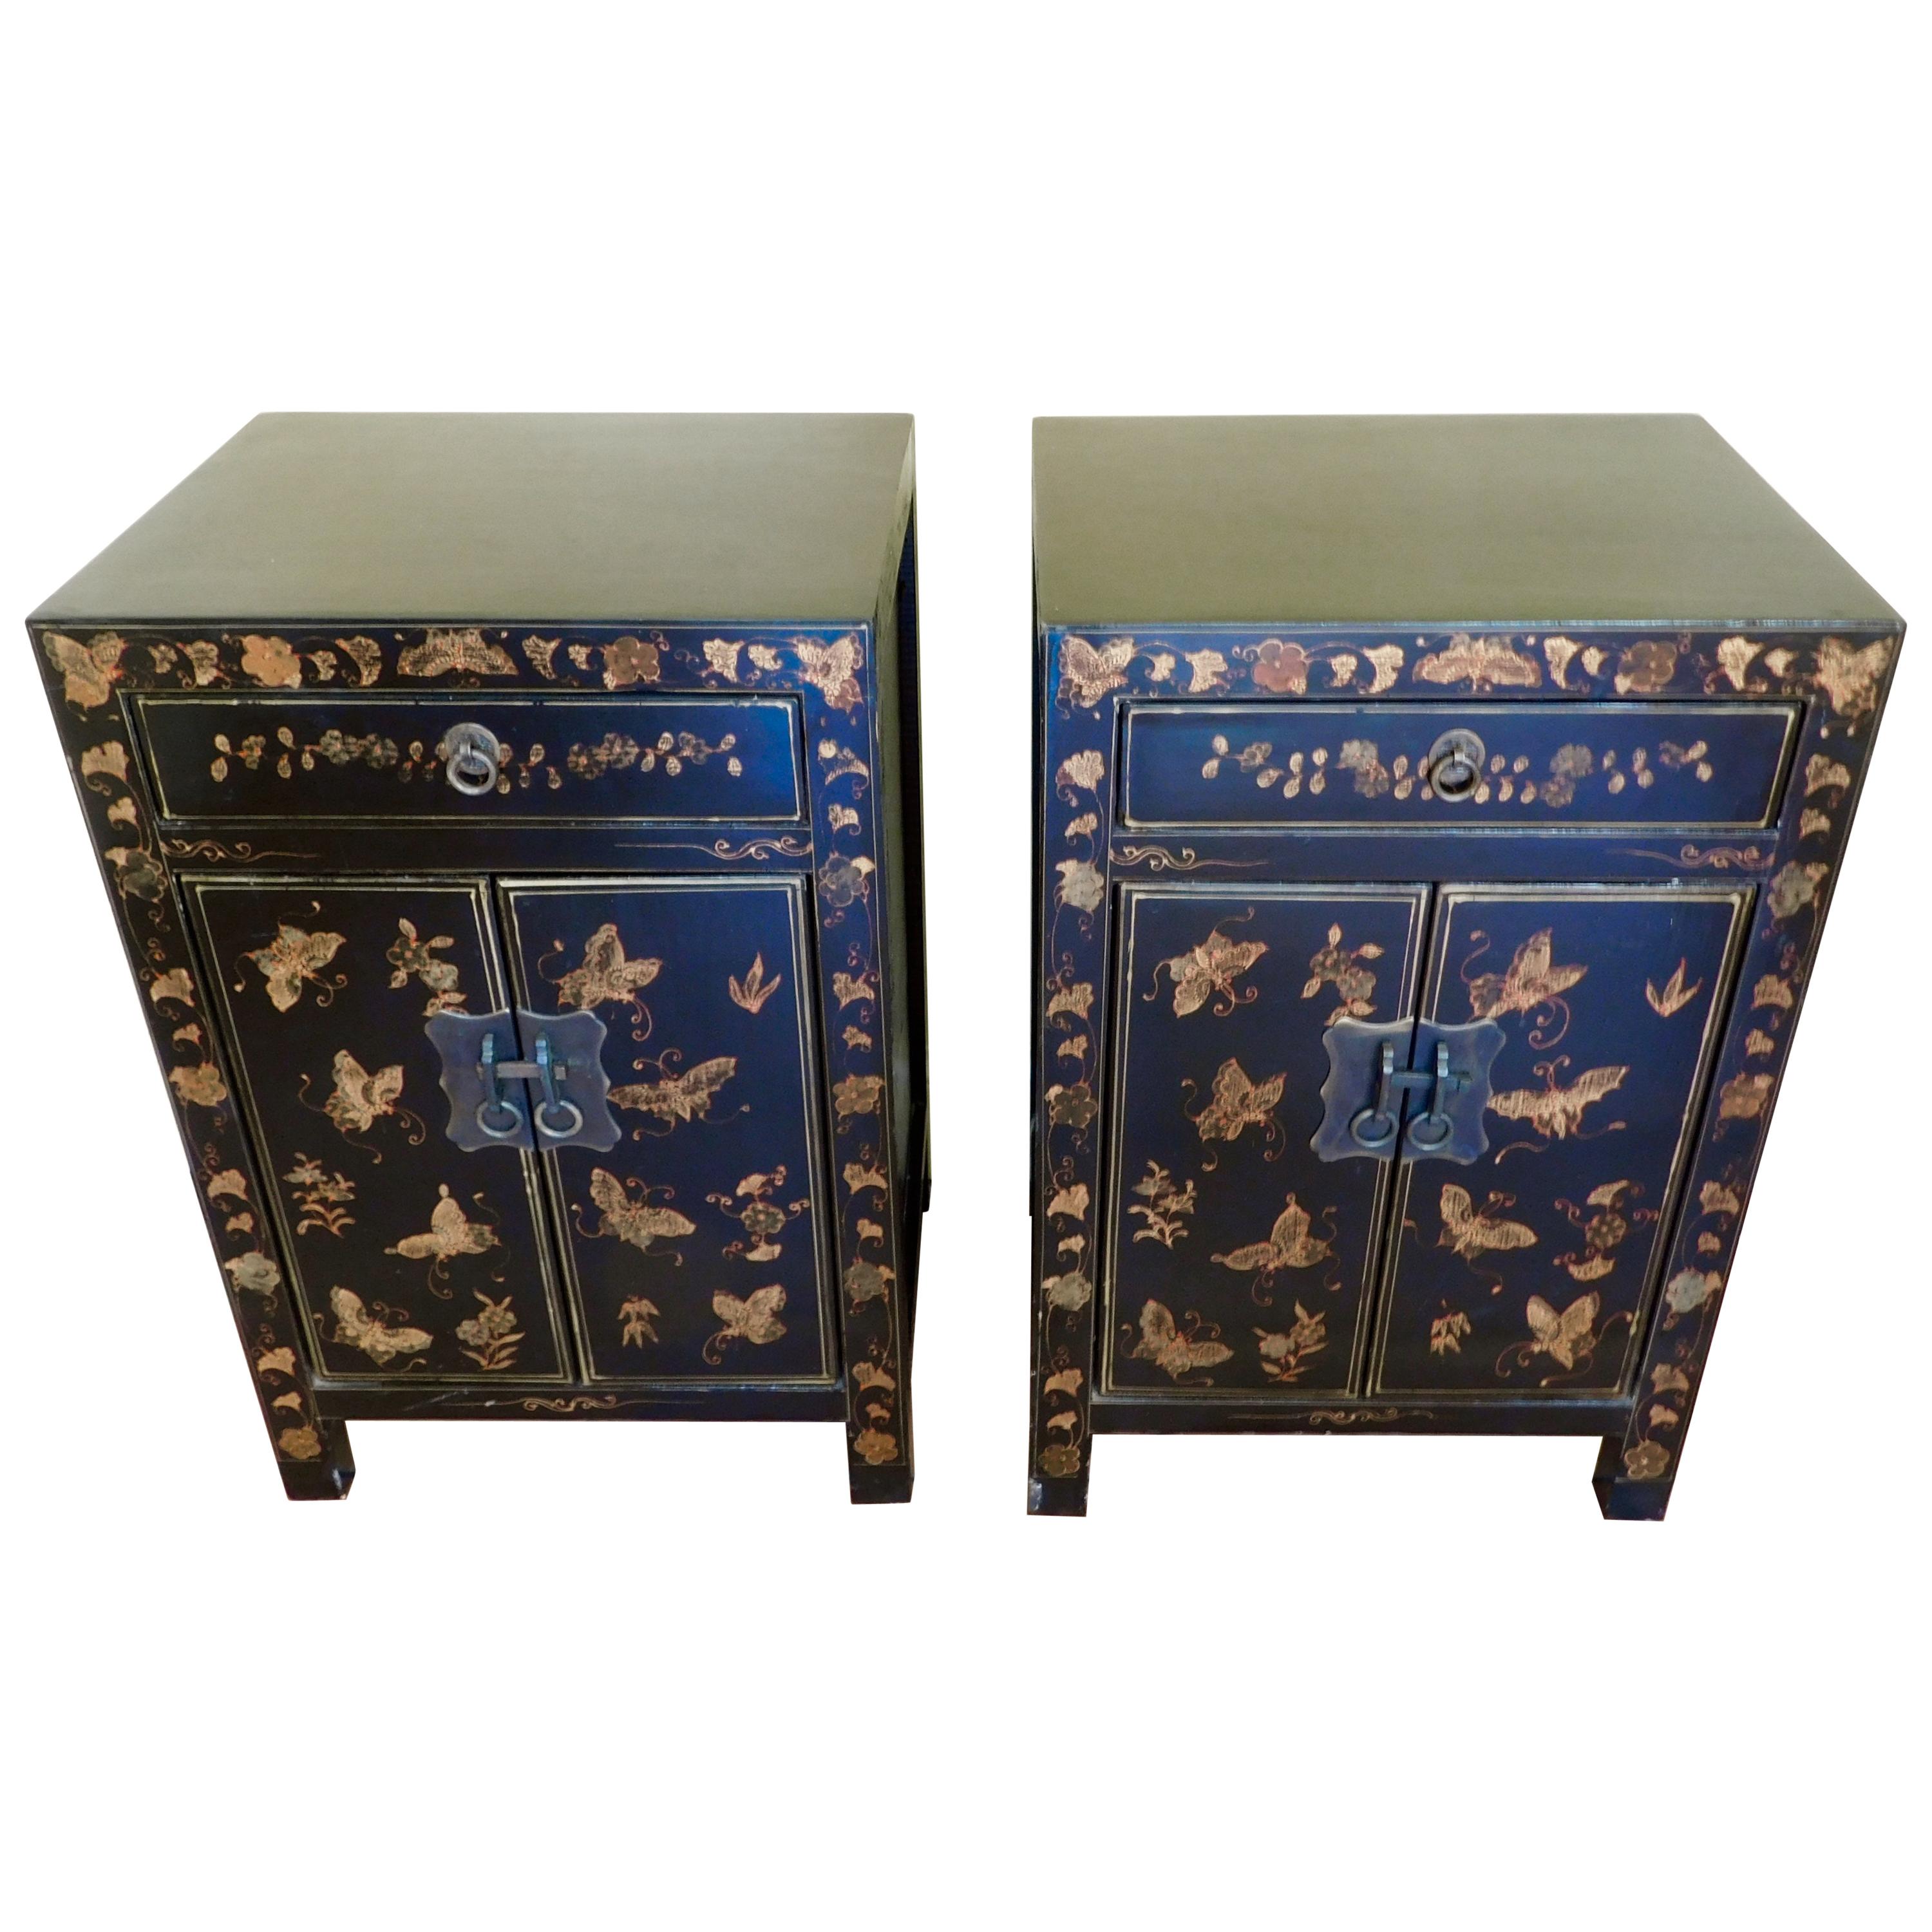 Pair of Chinese Black Lacquer Chinoiserie Bed Side Cabinets or Nightstands